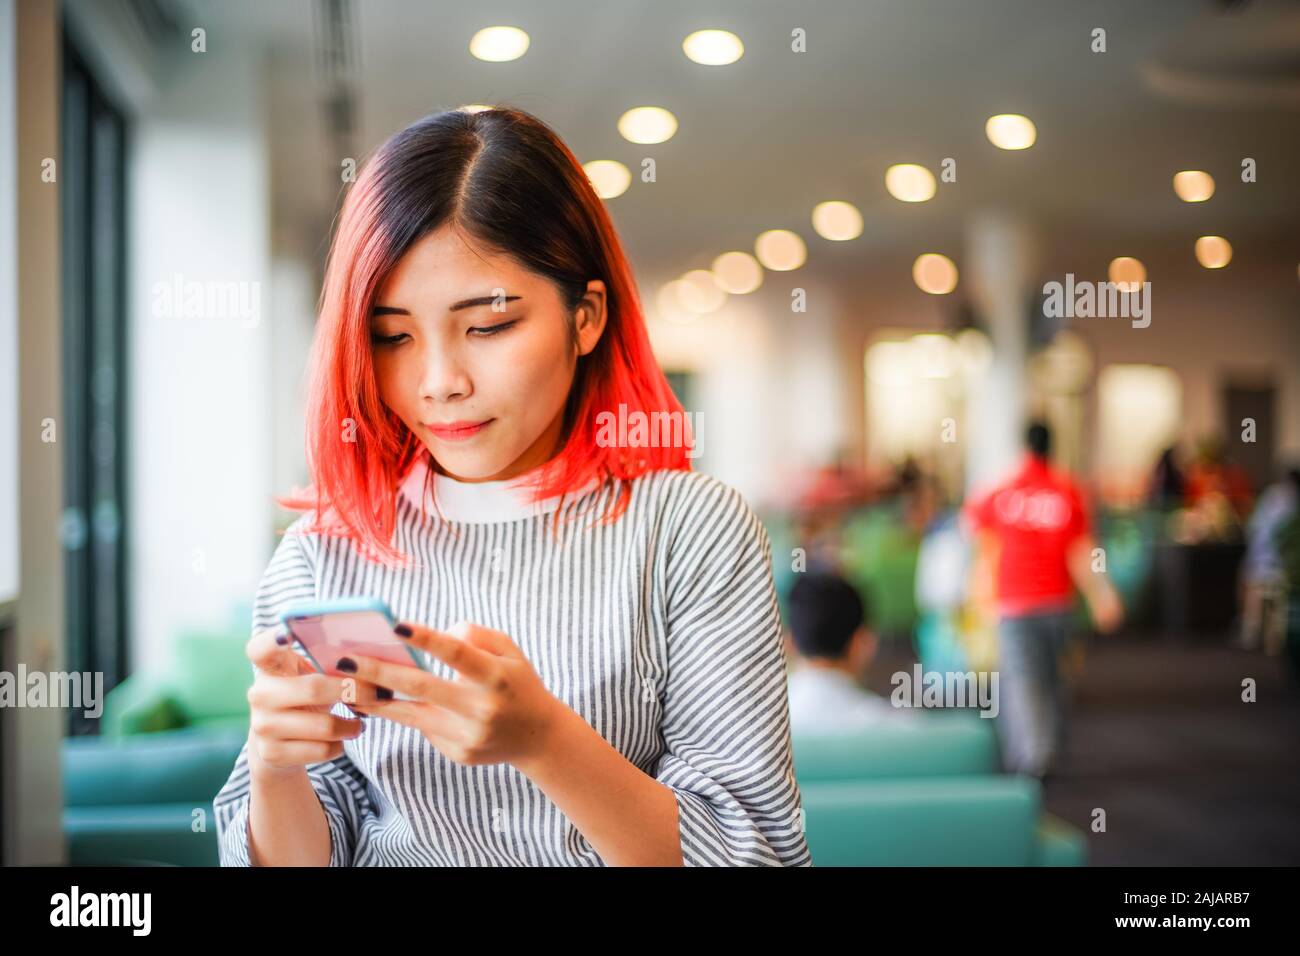 Portrait of a red hair young casual woman looking at mobile phone - Student girl paying attention to timetable on smartphone Stock Photo